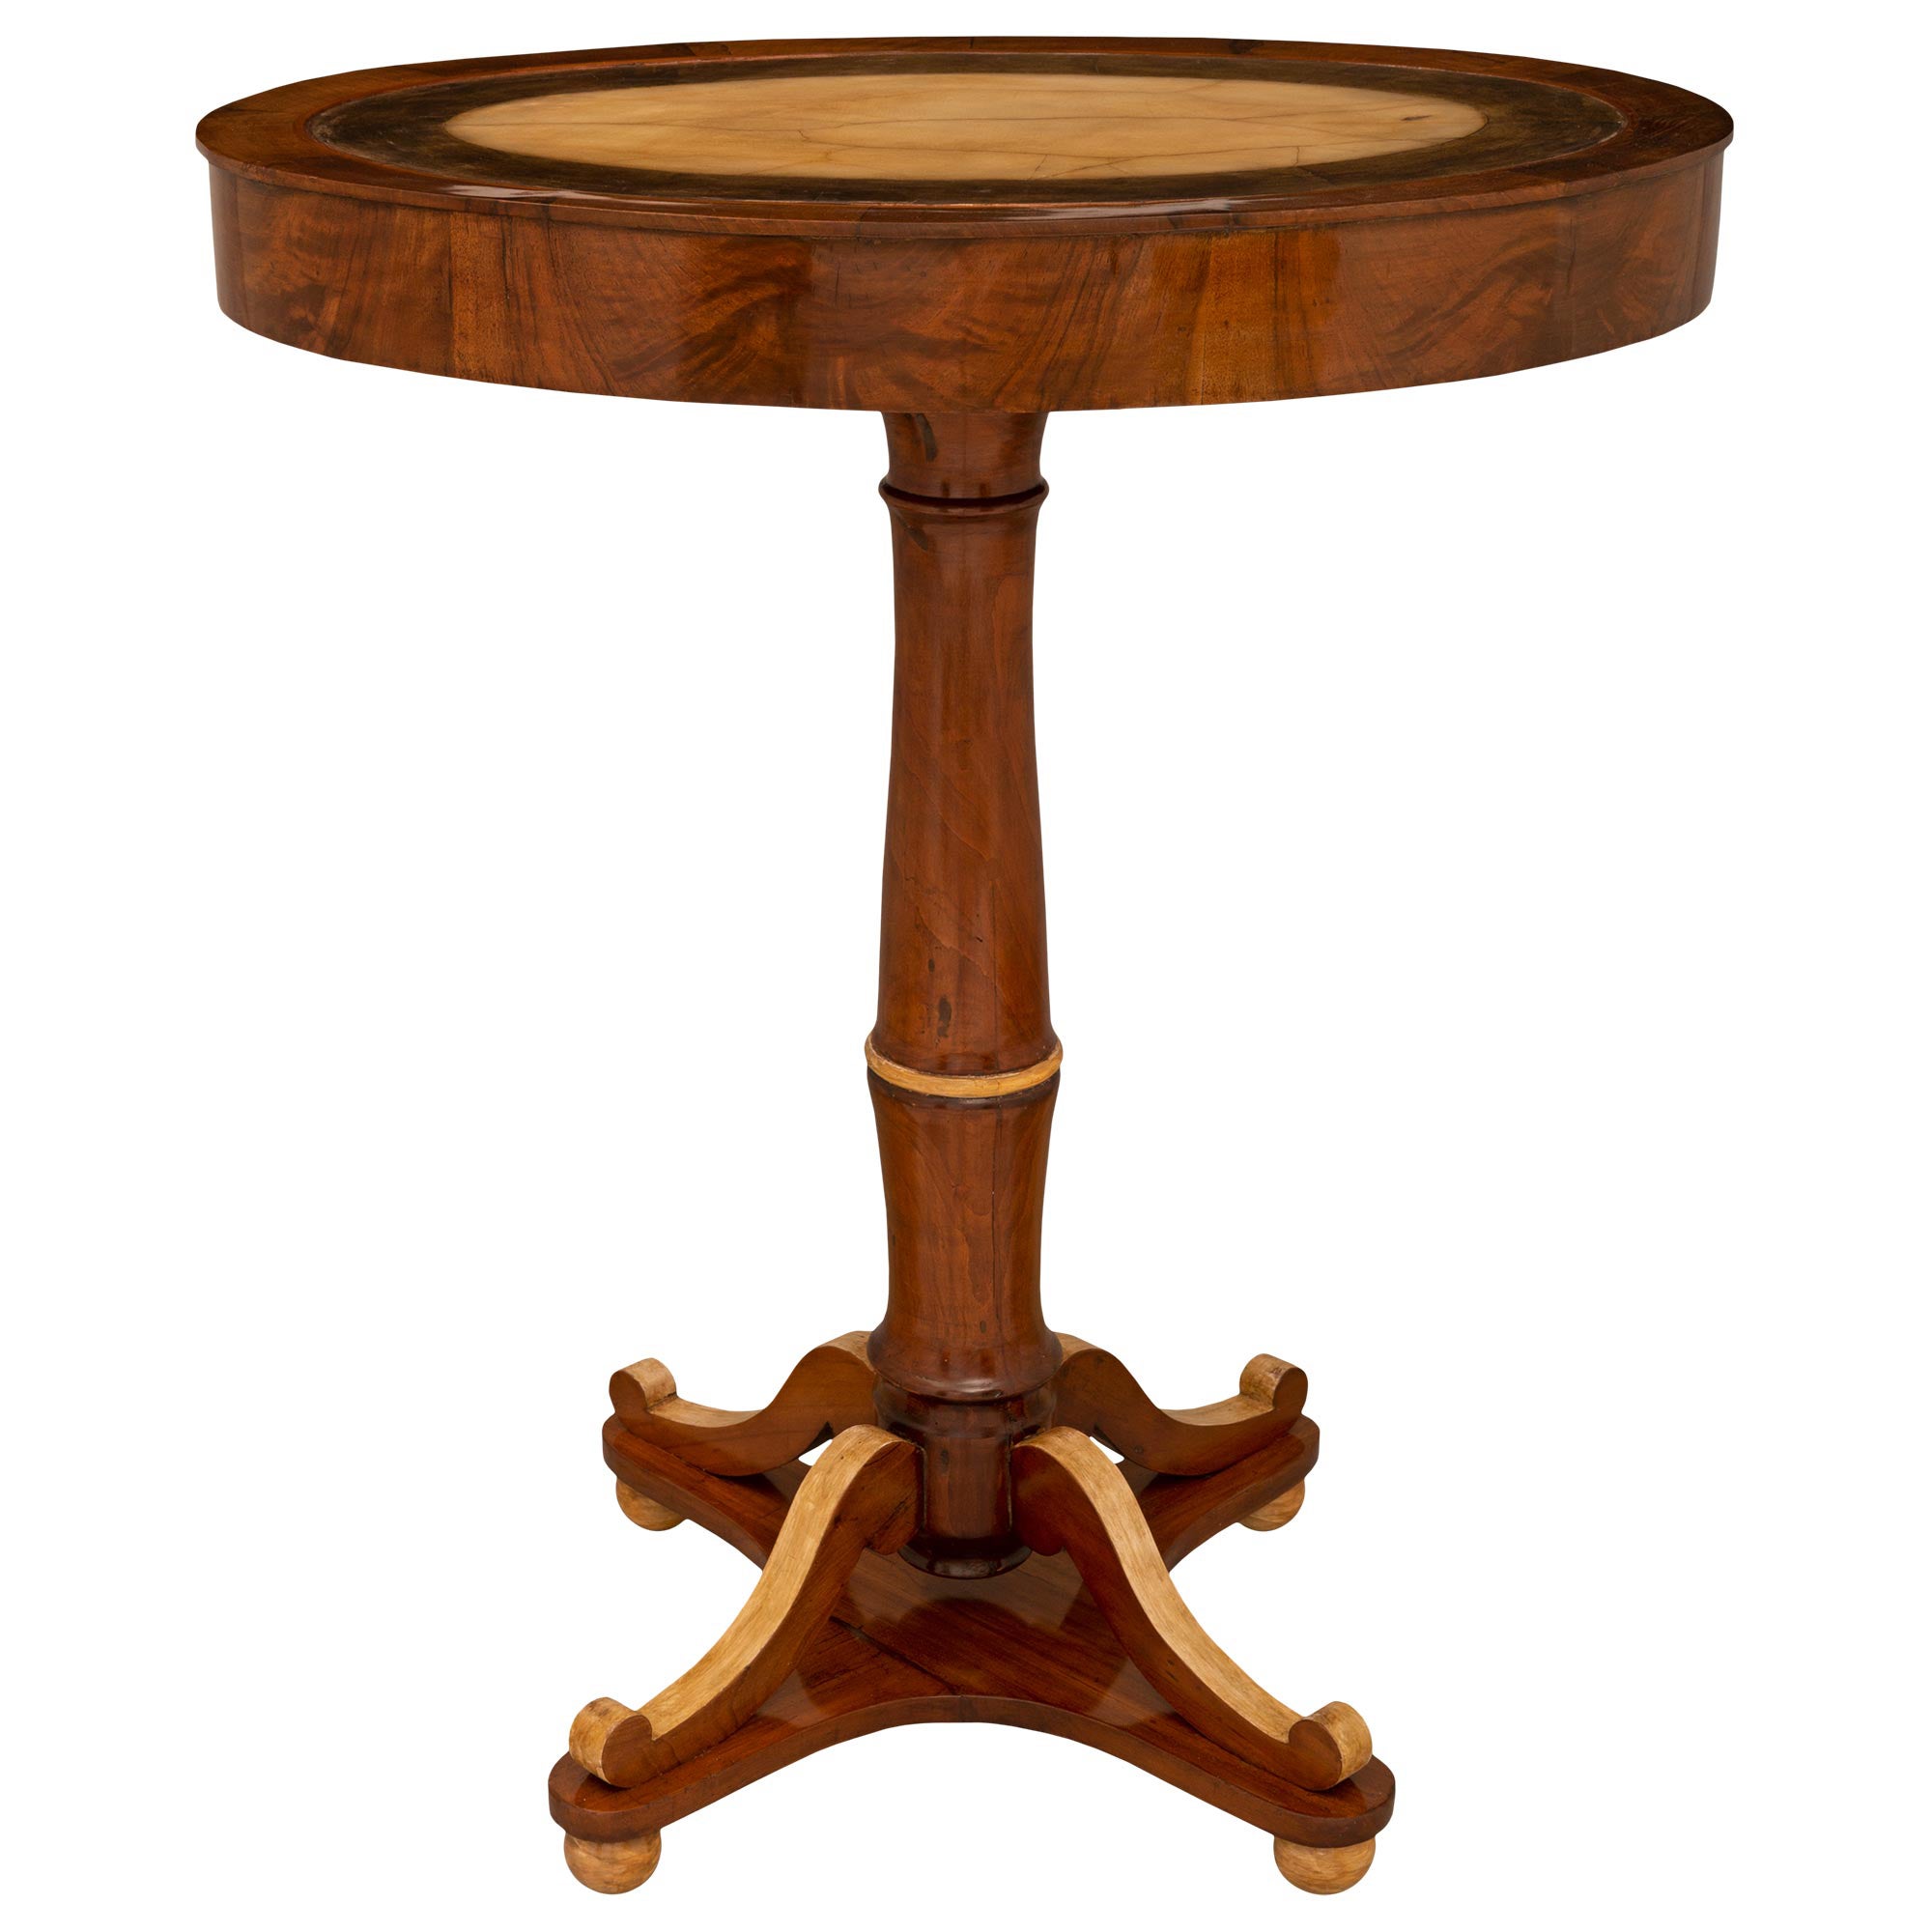 Italian 18th Century Tuscan St. Walnut, Patinated Wood And Onyx Side Table For Sale